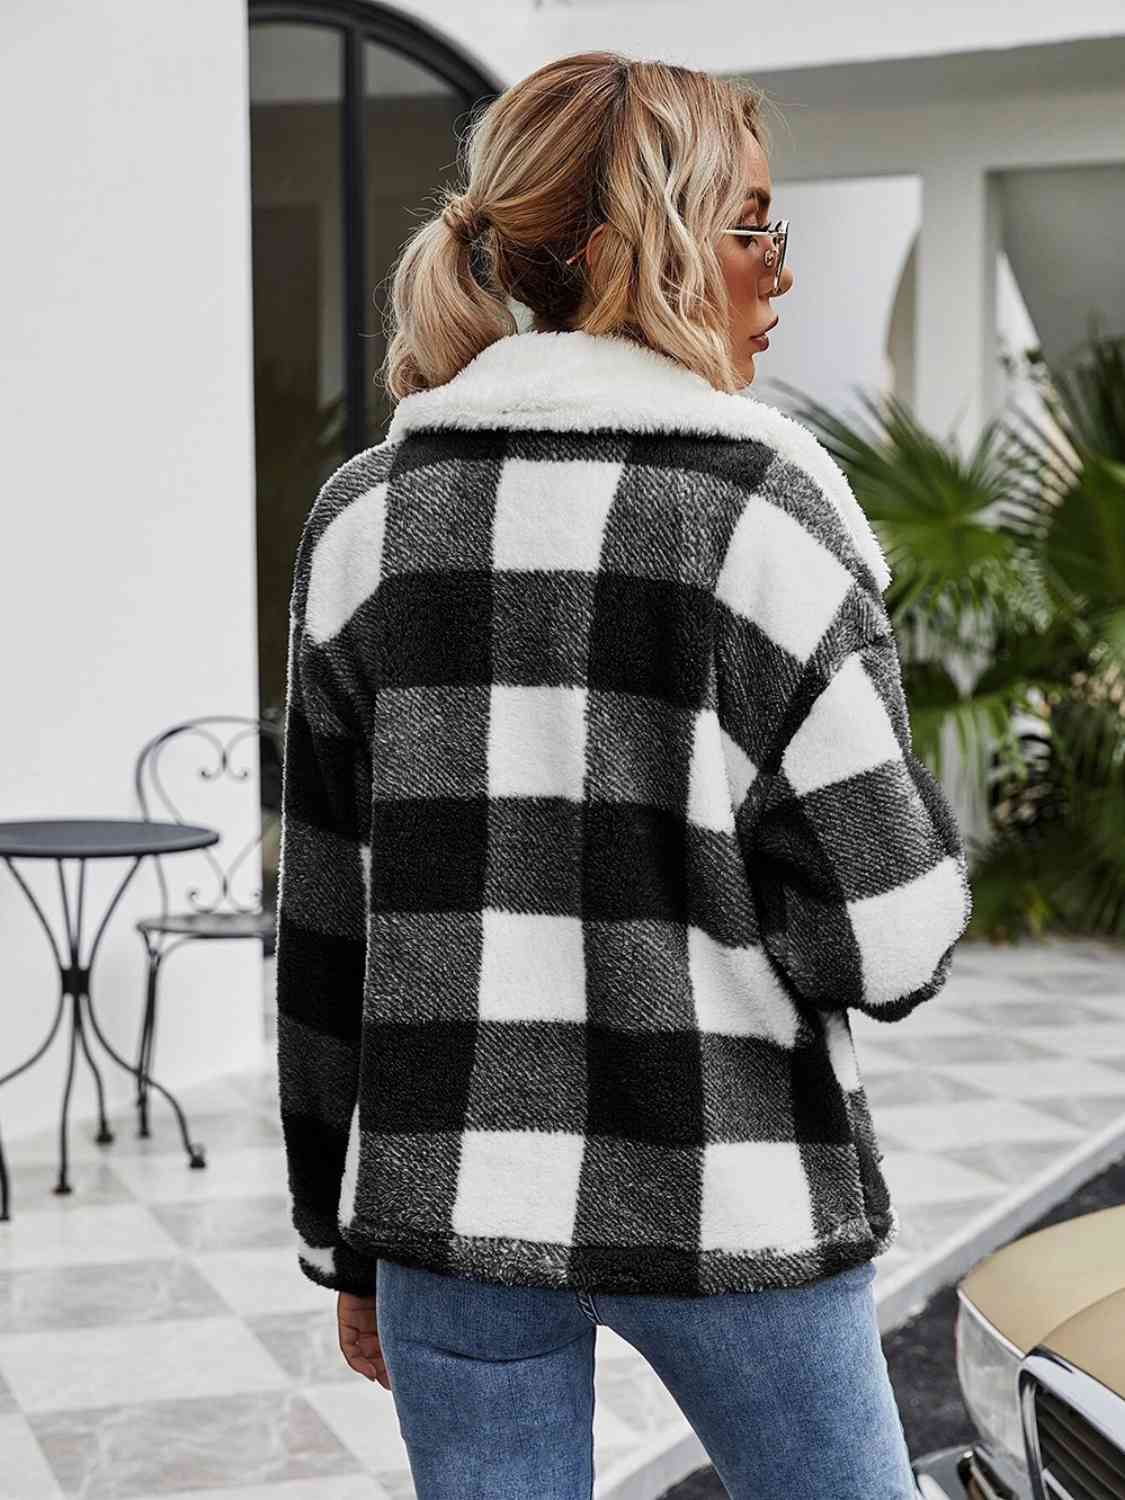 Plaid Zip-Up Collared Jacket - Bellisima Clothing Collective